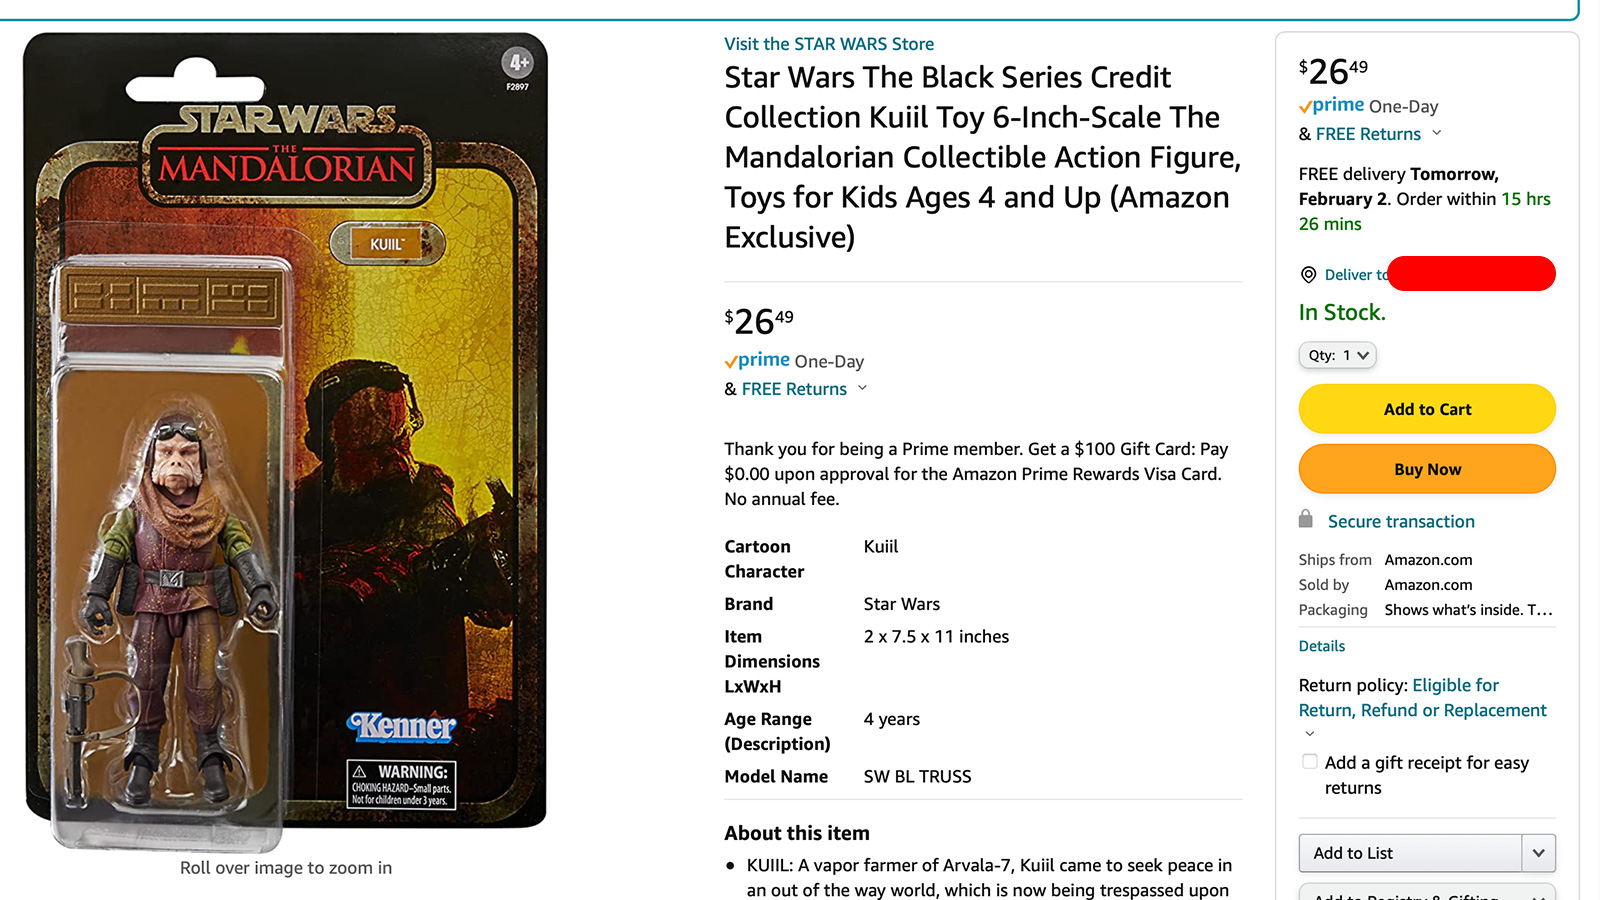 In Stock At Amazon - Exclusive The Black Series 6-Inch Credit Collection Kuiil Figure